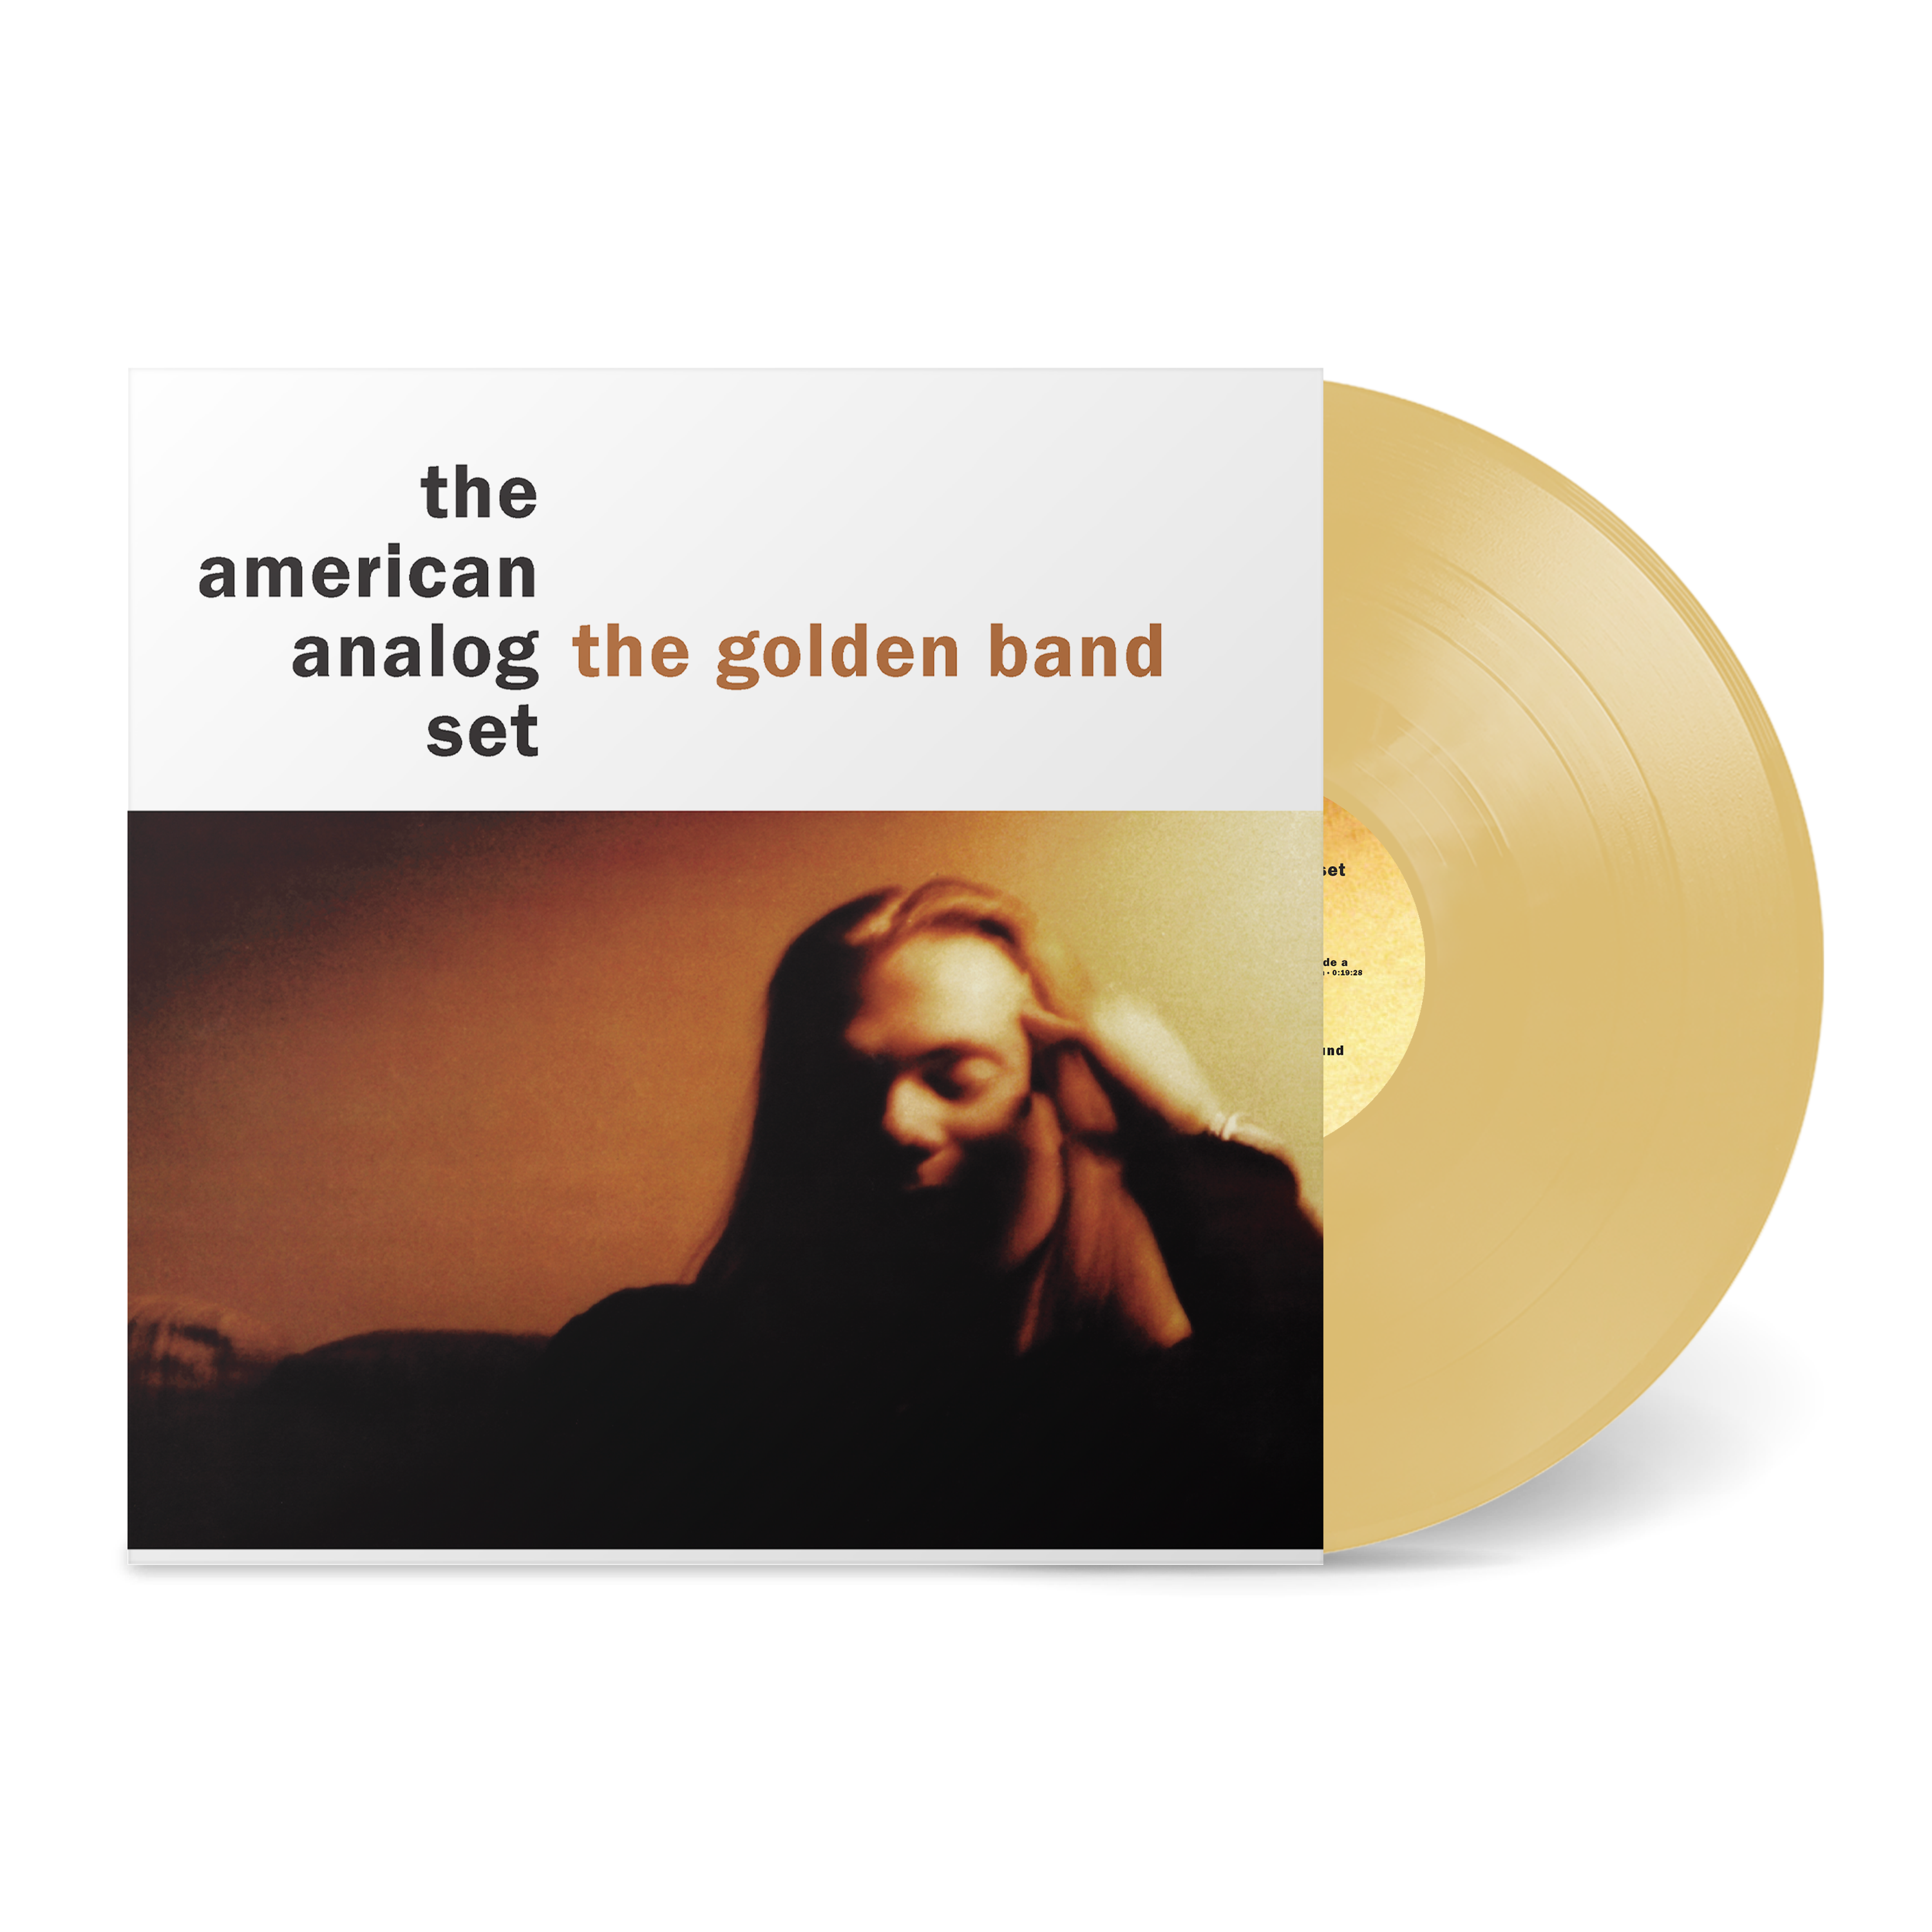 The American Analog Set - The Golden Band: Limited 'Good Friend' Gold Vinyl LP